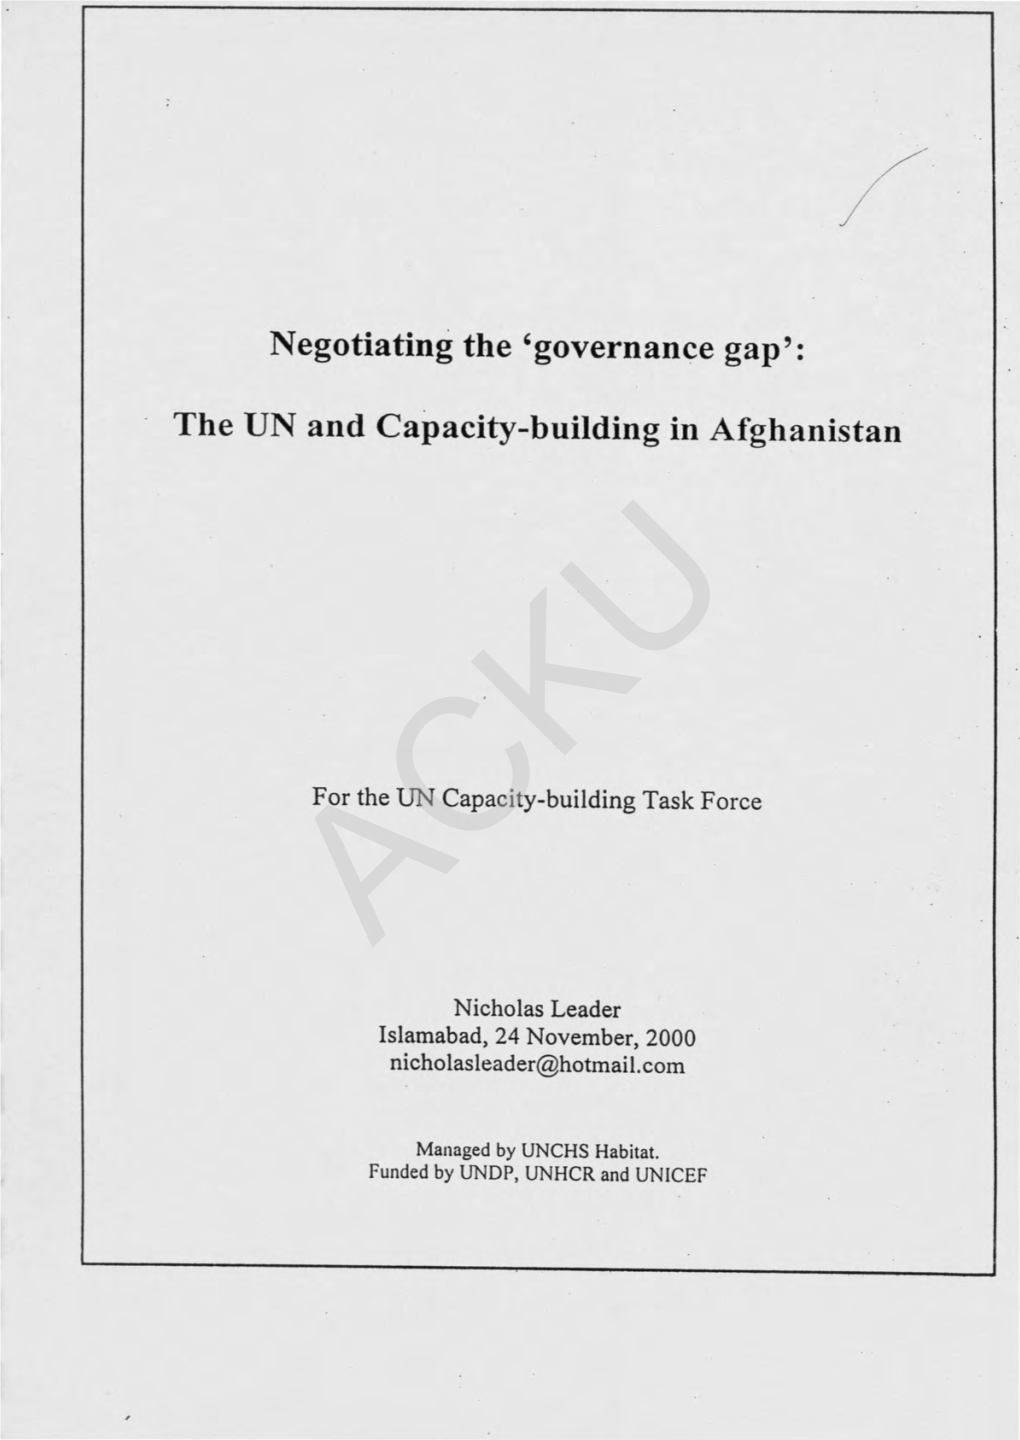 The UN and Capacity-Building in Afghanistan